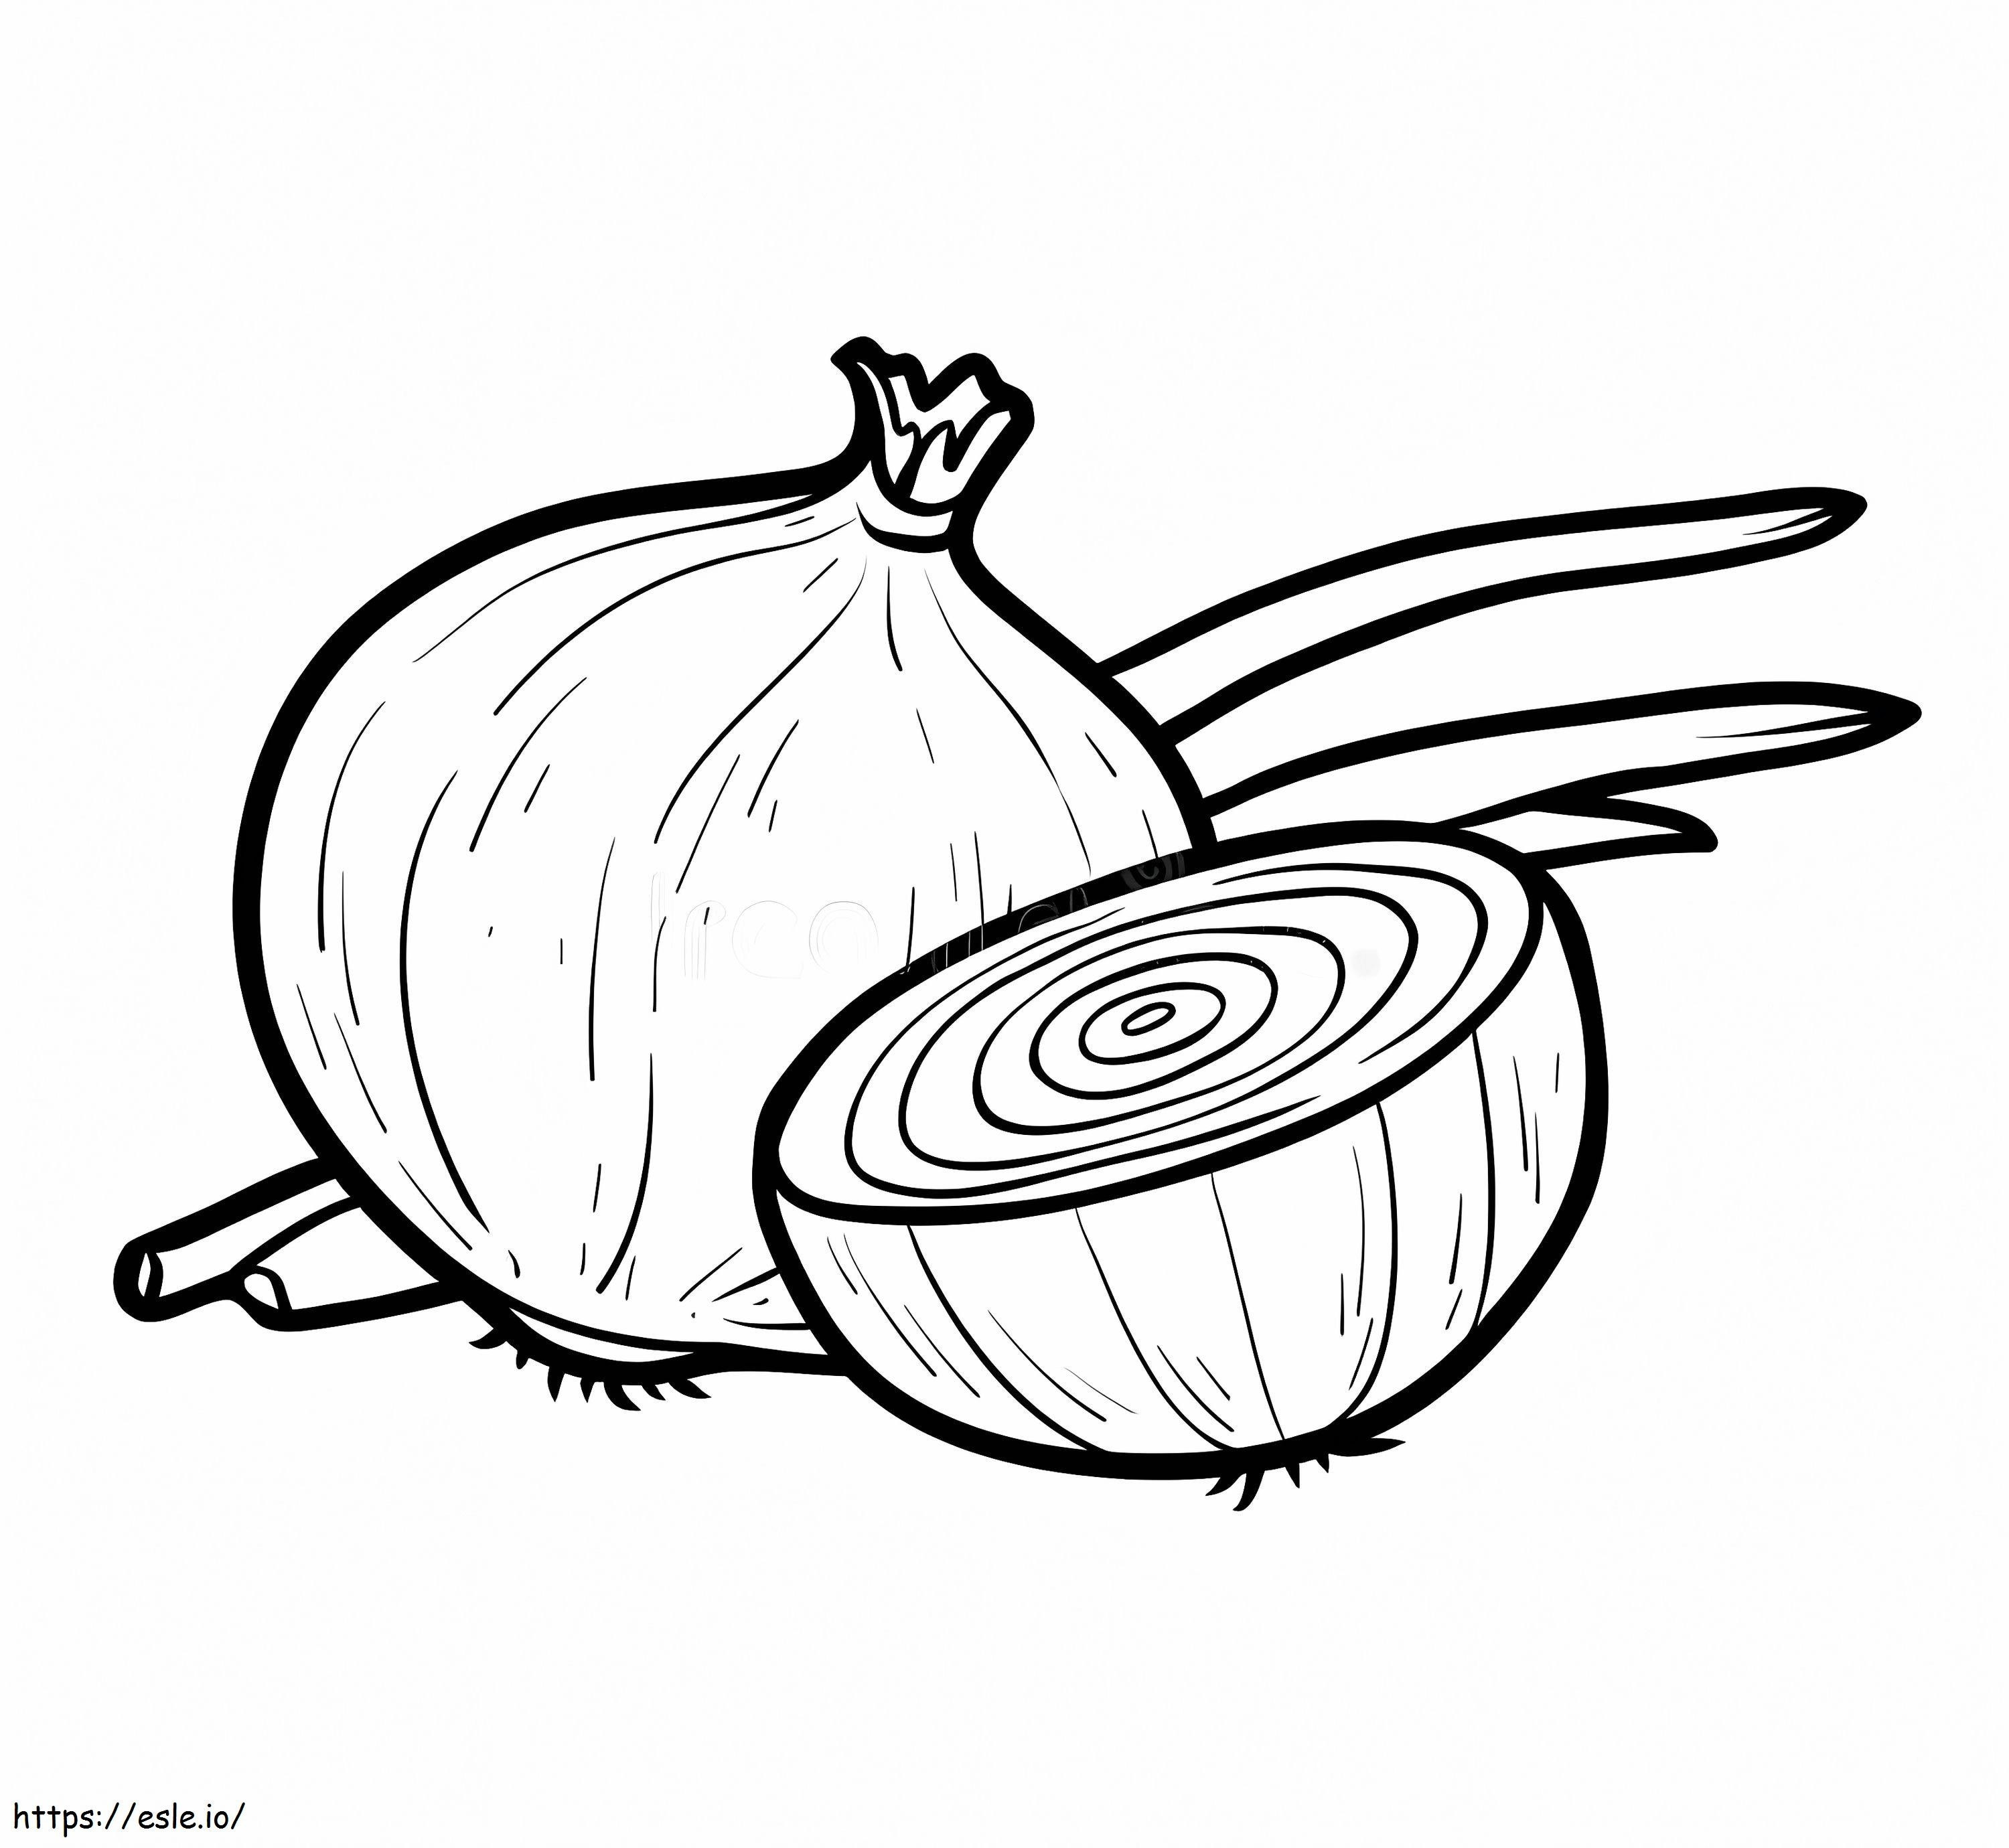 One Onion And Half An Onion coloring page